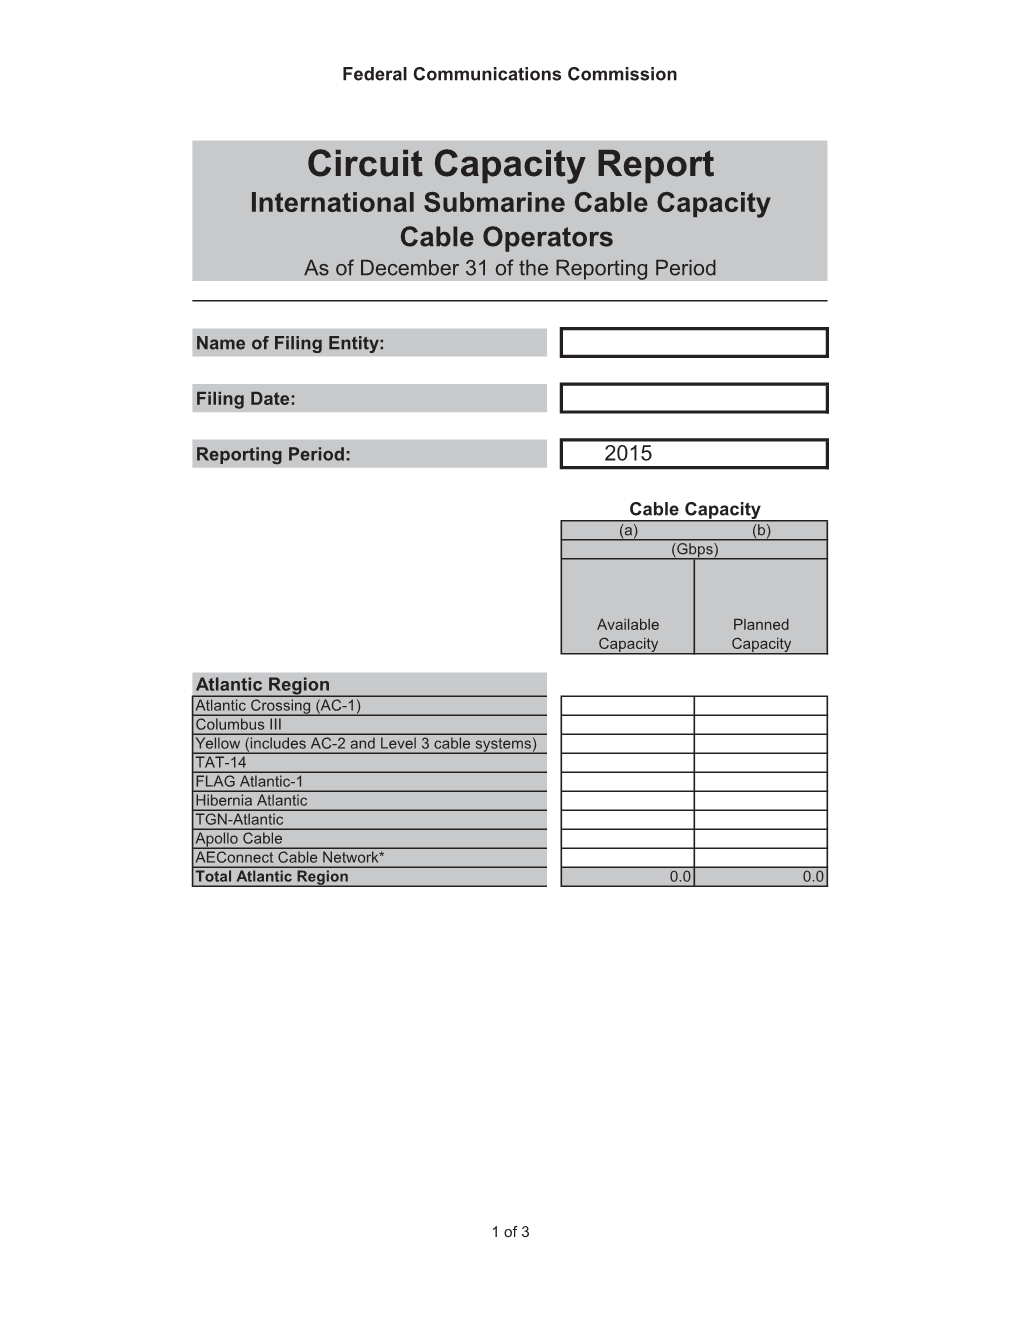 Circuit Capacity Report International Submarine Cable Capacity Cable Operators As of December 31 of the Reporting Period